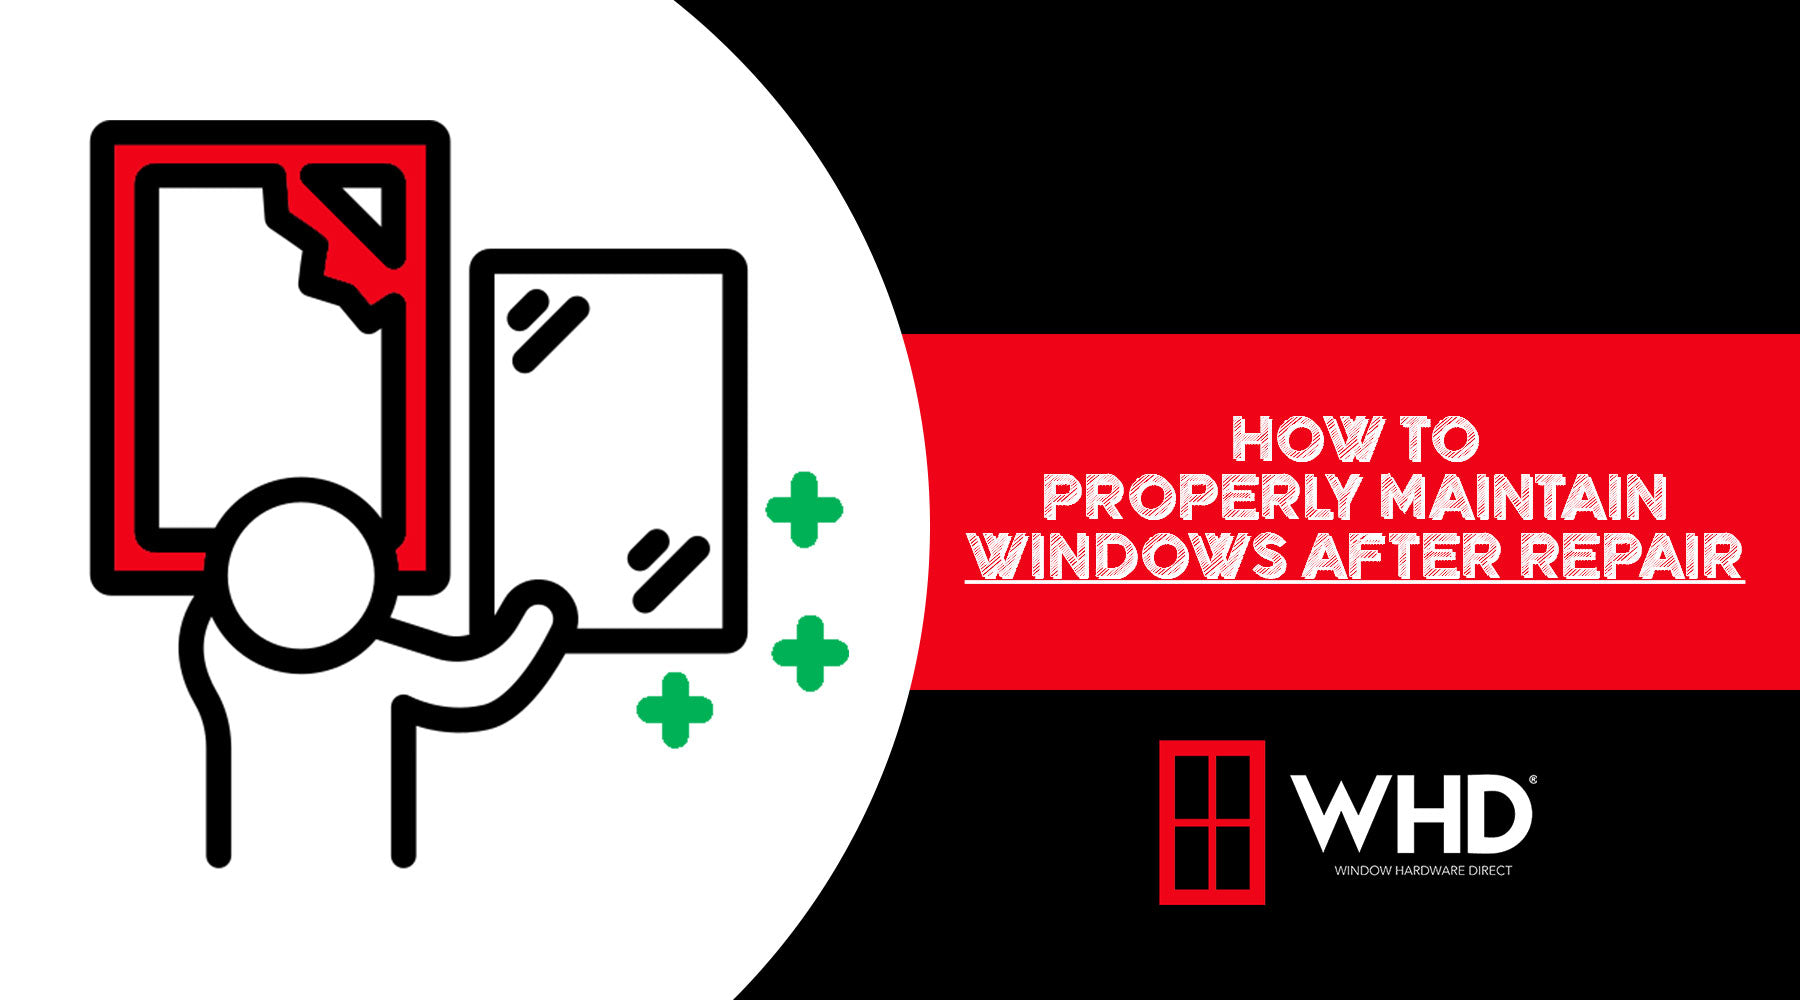 Window Maintenance 101: Tips for Keeping Your Windows in Tip-Top Shape After Repair